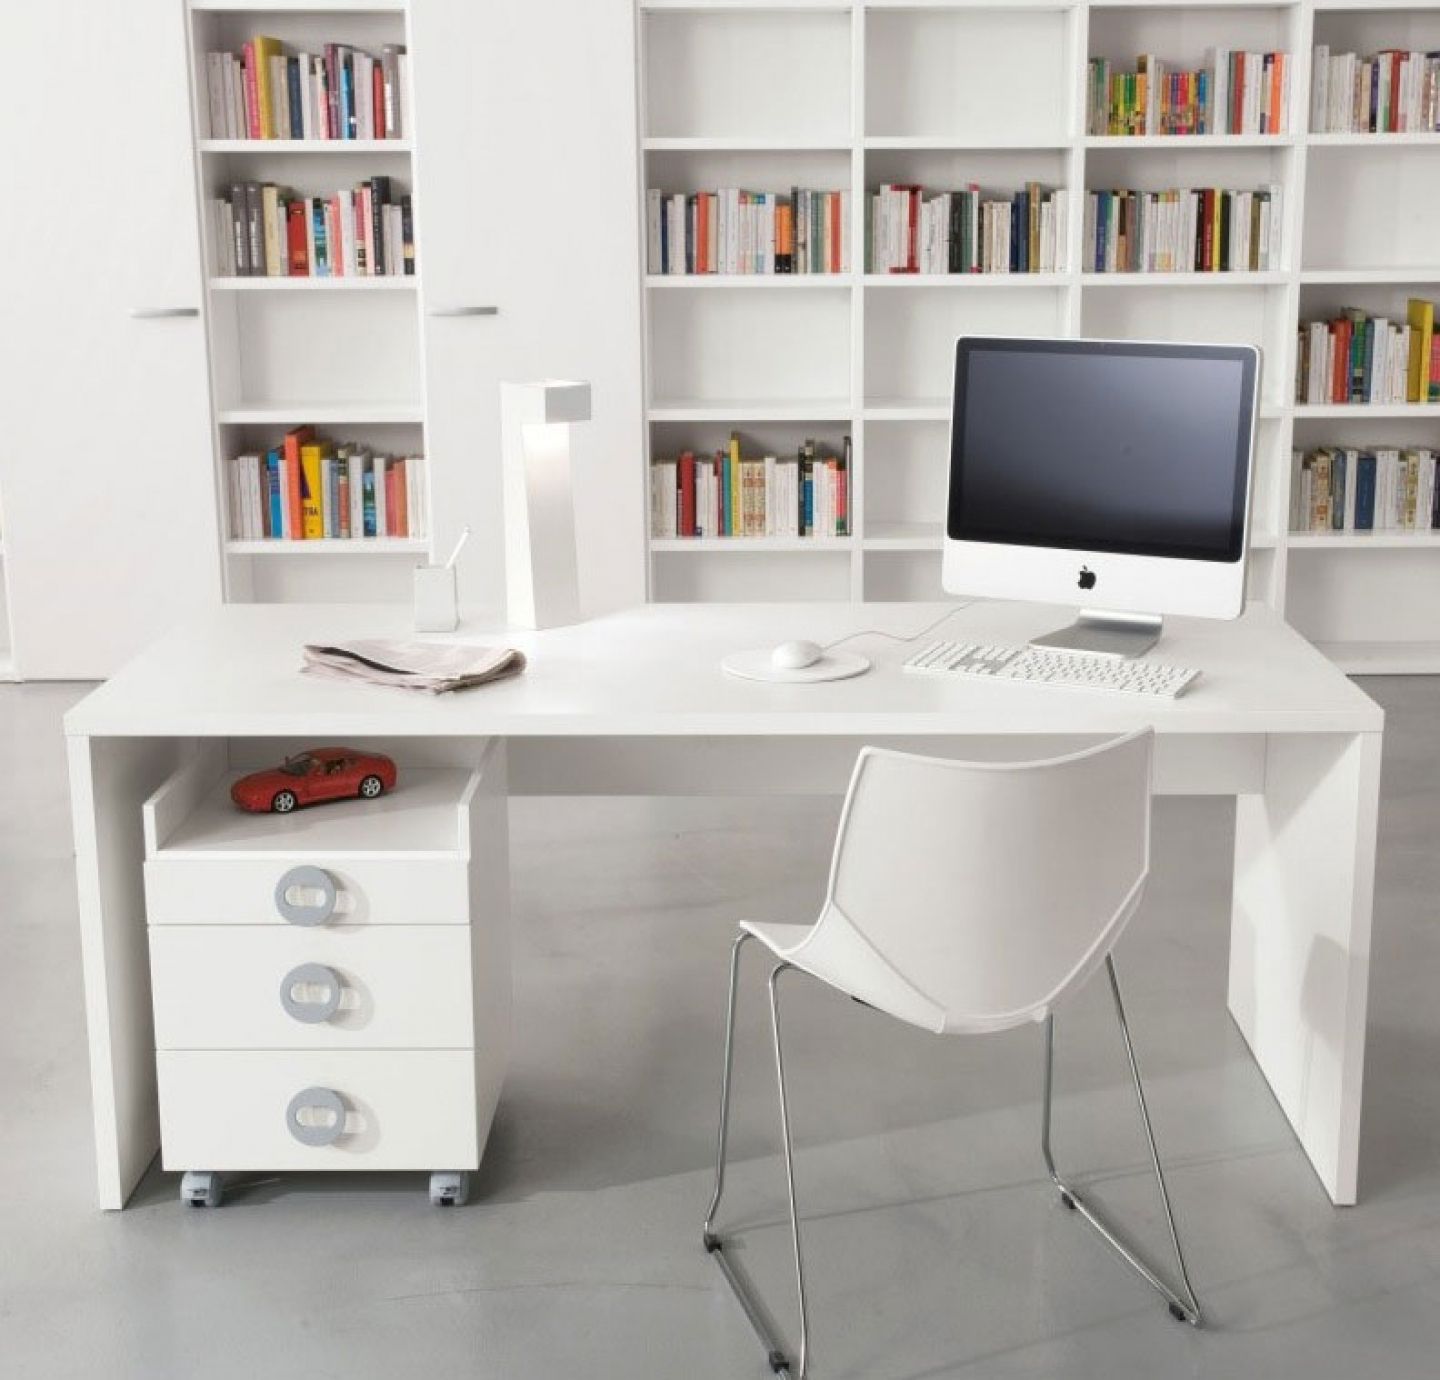 2018 Funiture: Modern Computer Desks Ideas With Freestanding White Intended For Modern Computer Desks (Gallery 7 of 20)